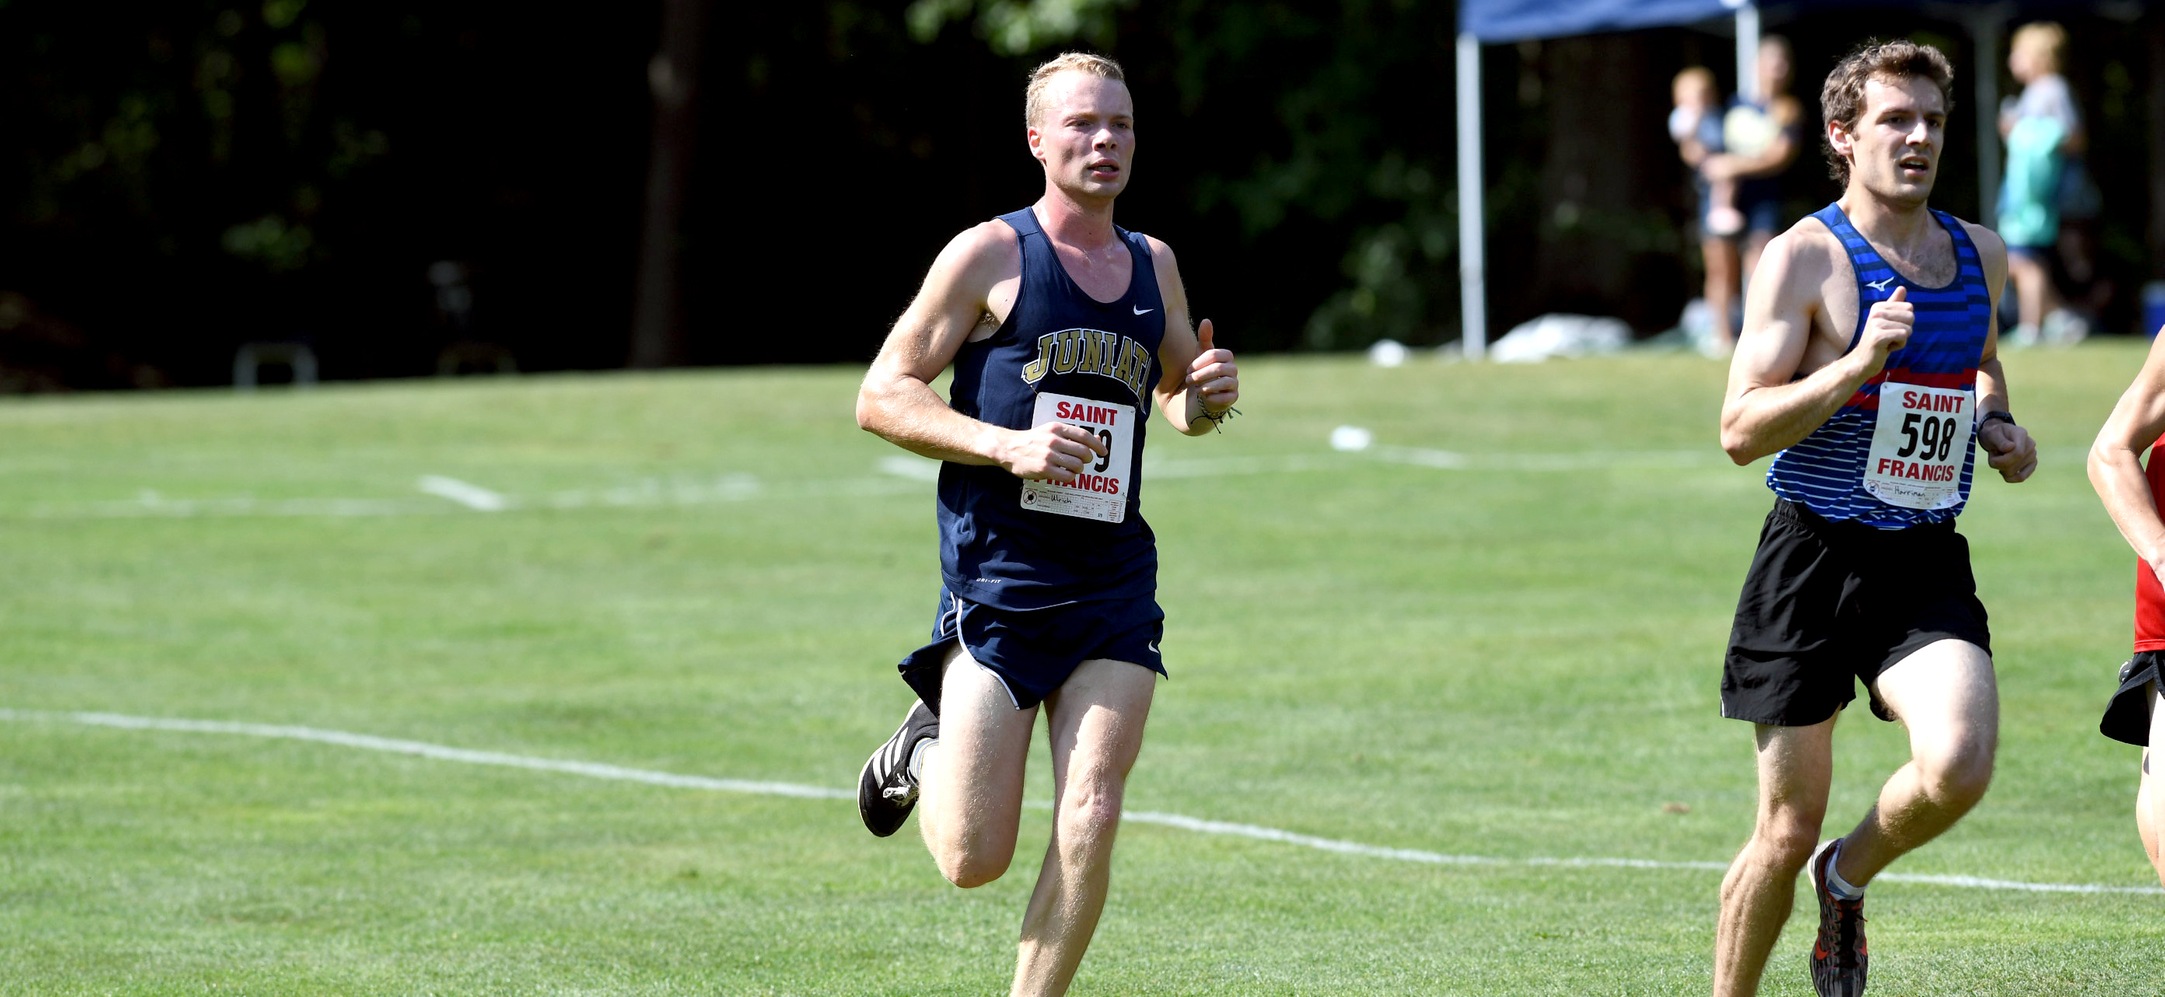 Men's Cross Country Competes at Lock Haven Invitational